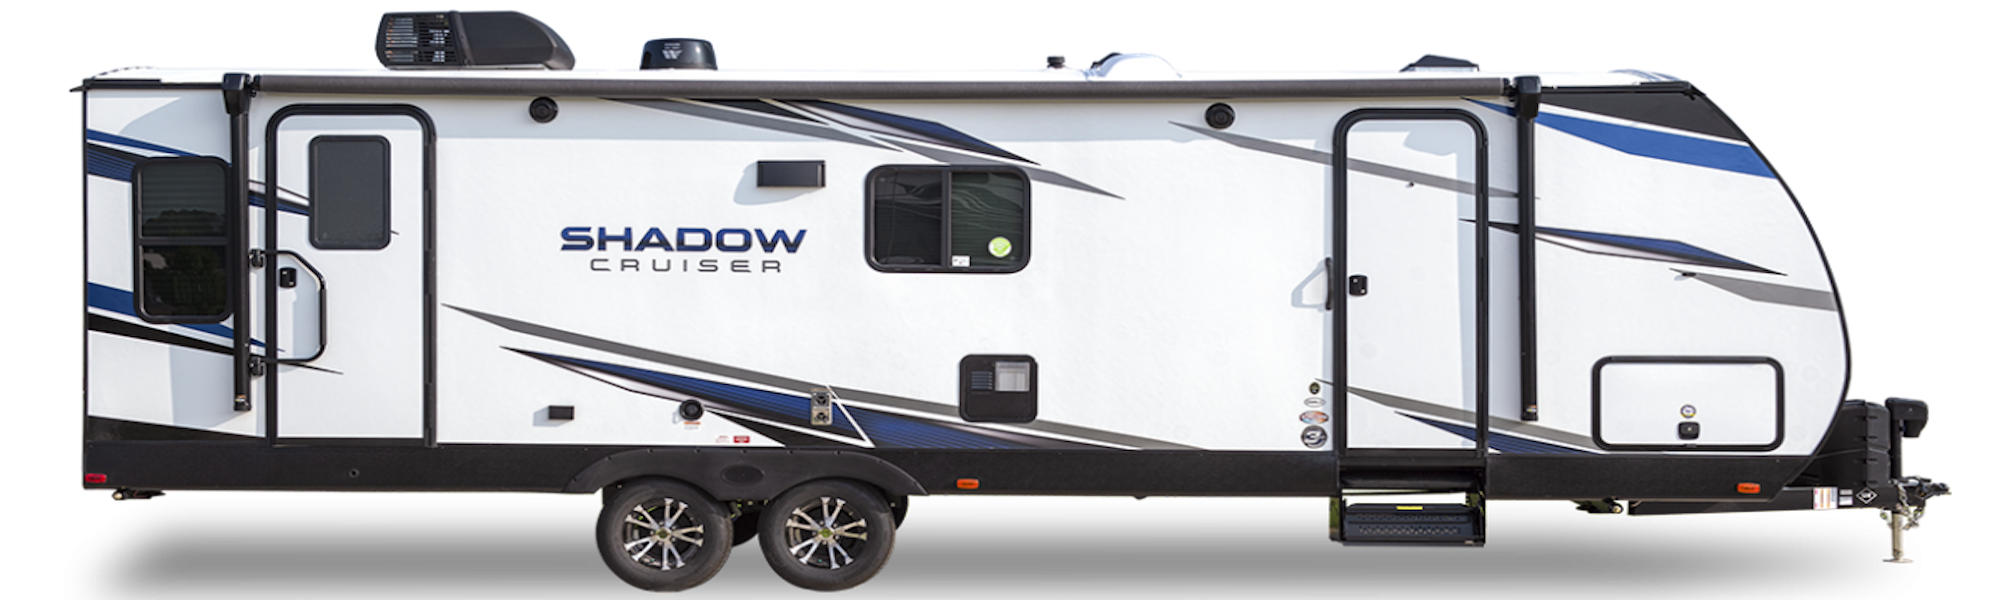 <a href=<img src="images/upload/October_2021/2021-cruiser-rv-shadow-cruiser-okanagan-bc.png">alt="A side view of a grey, white, and blue Cruiser RV Shadow Cruiser travel trailer on a white background."/></a>